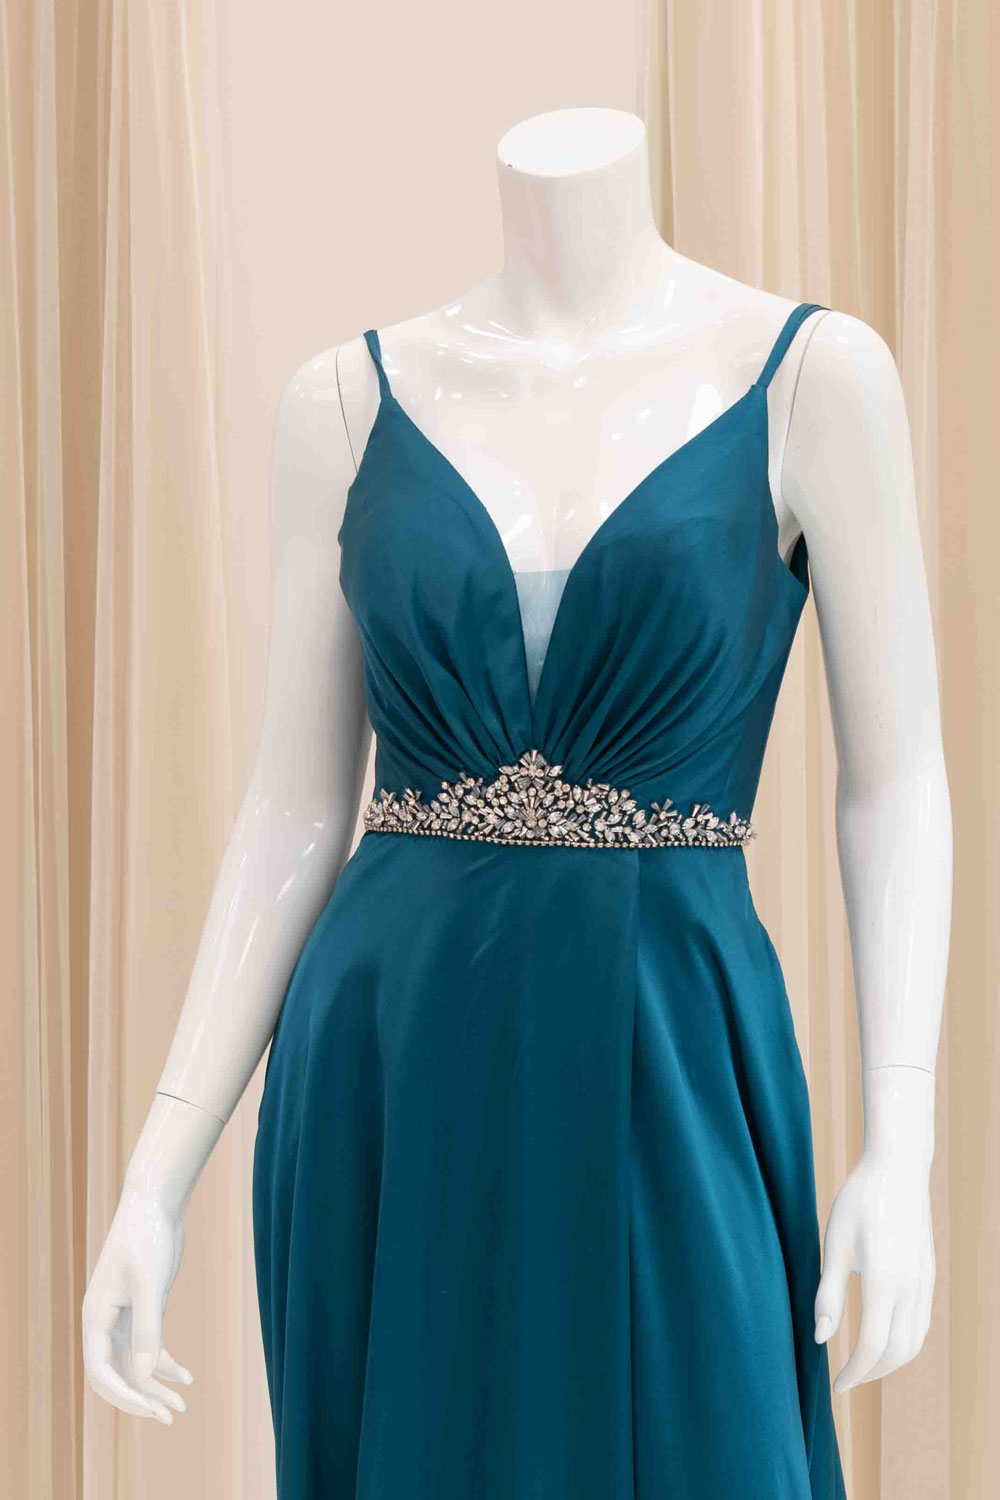 Satin Dress with Crystals at Waist in Teal